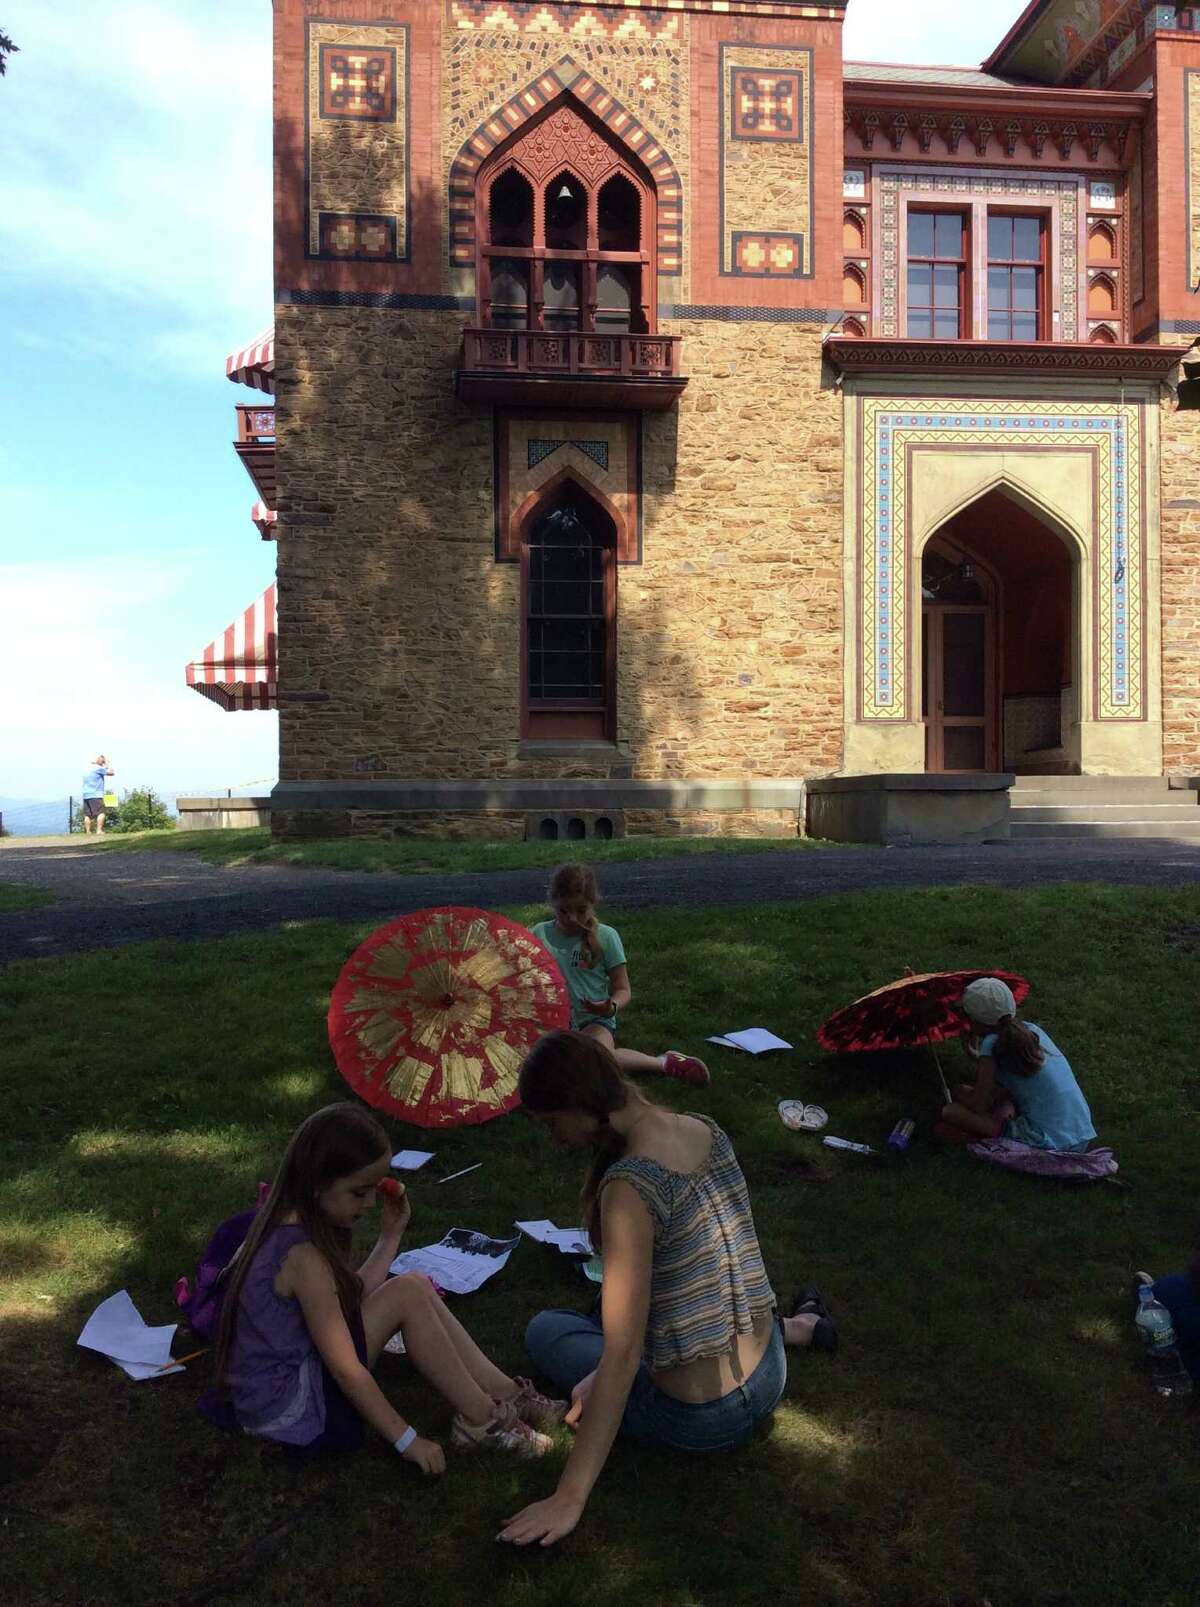 Students relax on the grass during a field trip to Olana in Hudson. (The Olana Partnership)